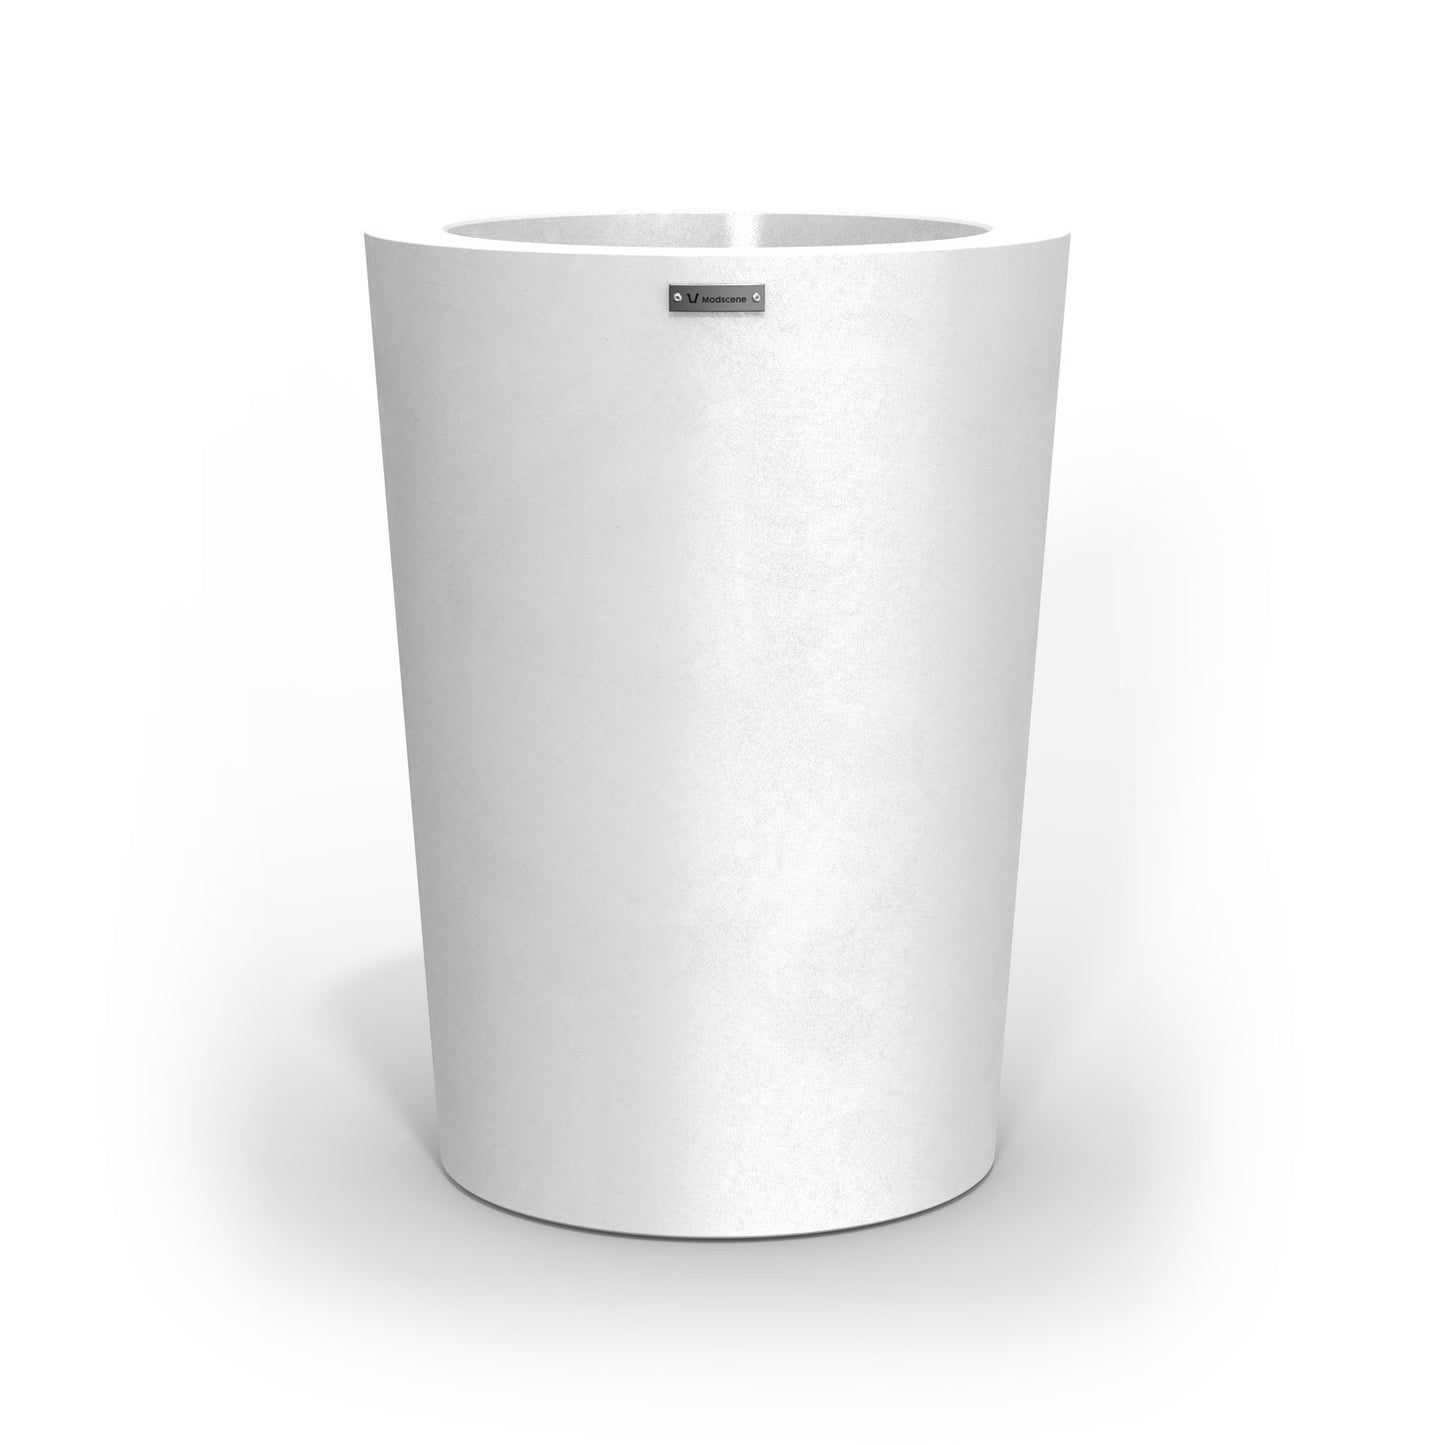 A modern style planter pot in a matte white colour. Made by Modscene NZ.